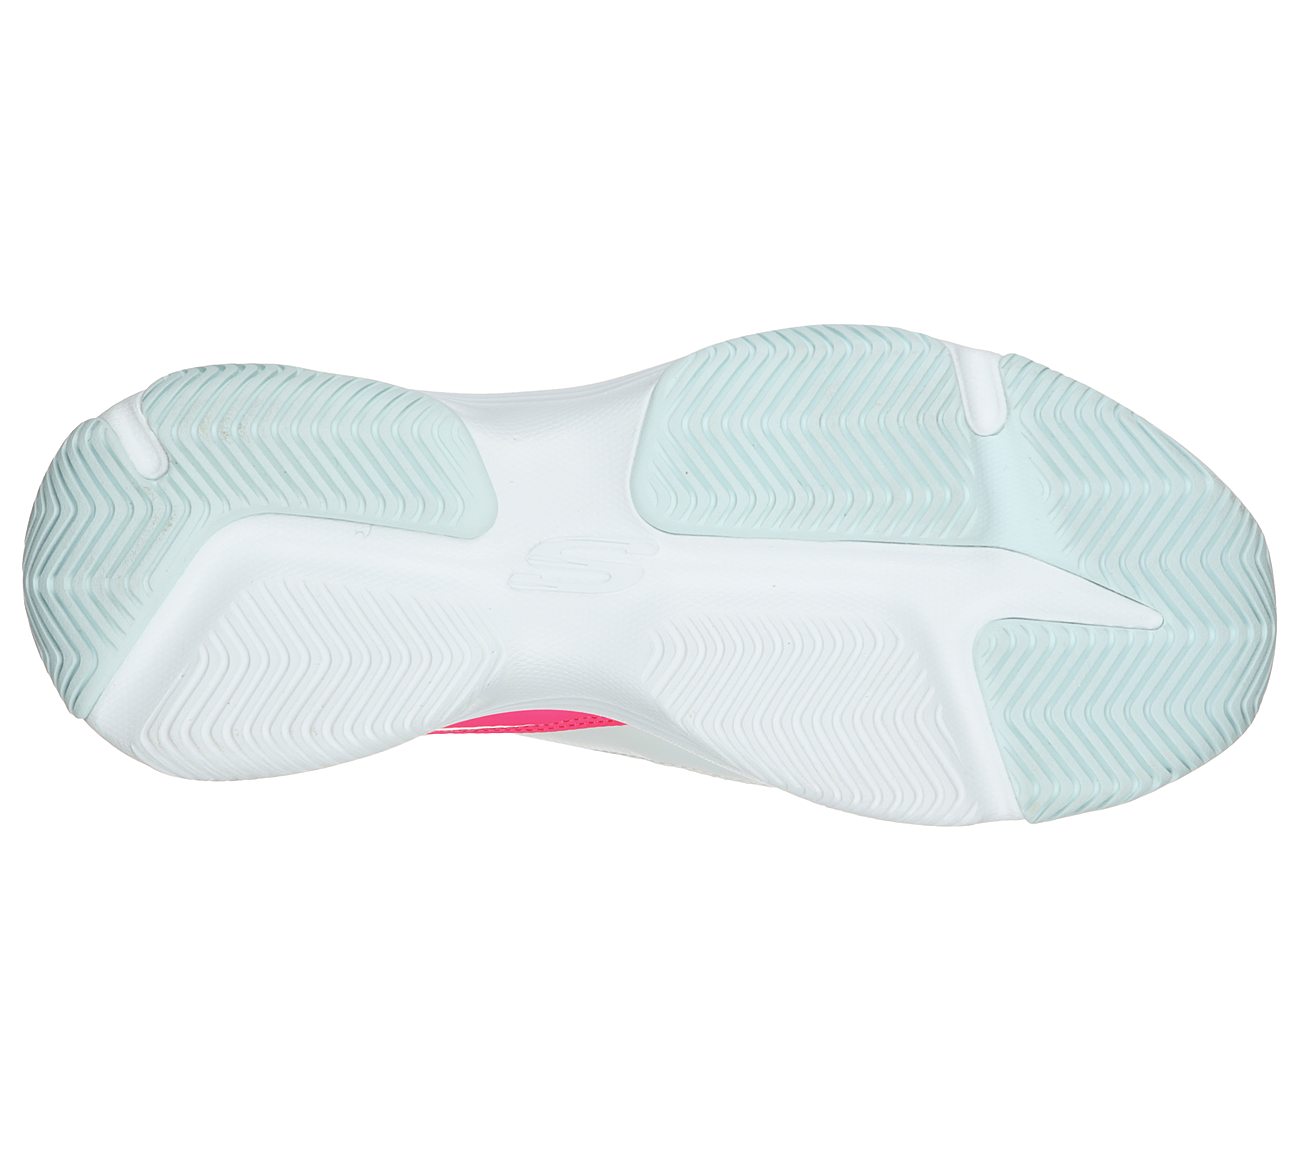 ENERGY RACER-SHE'S ICONIC, WHITE/BLUE/PINK Footwear Bottom View